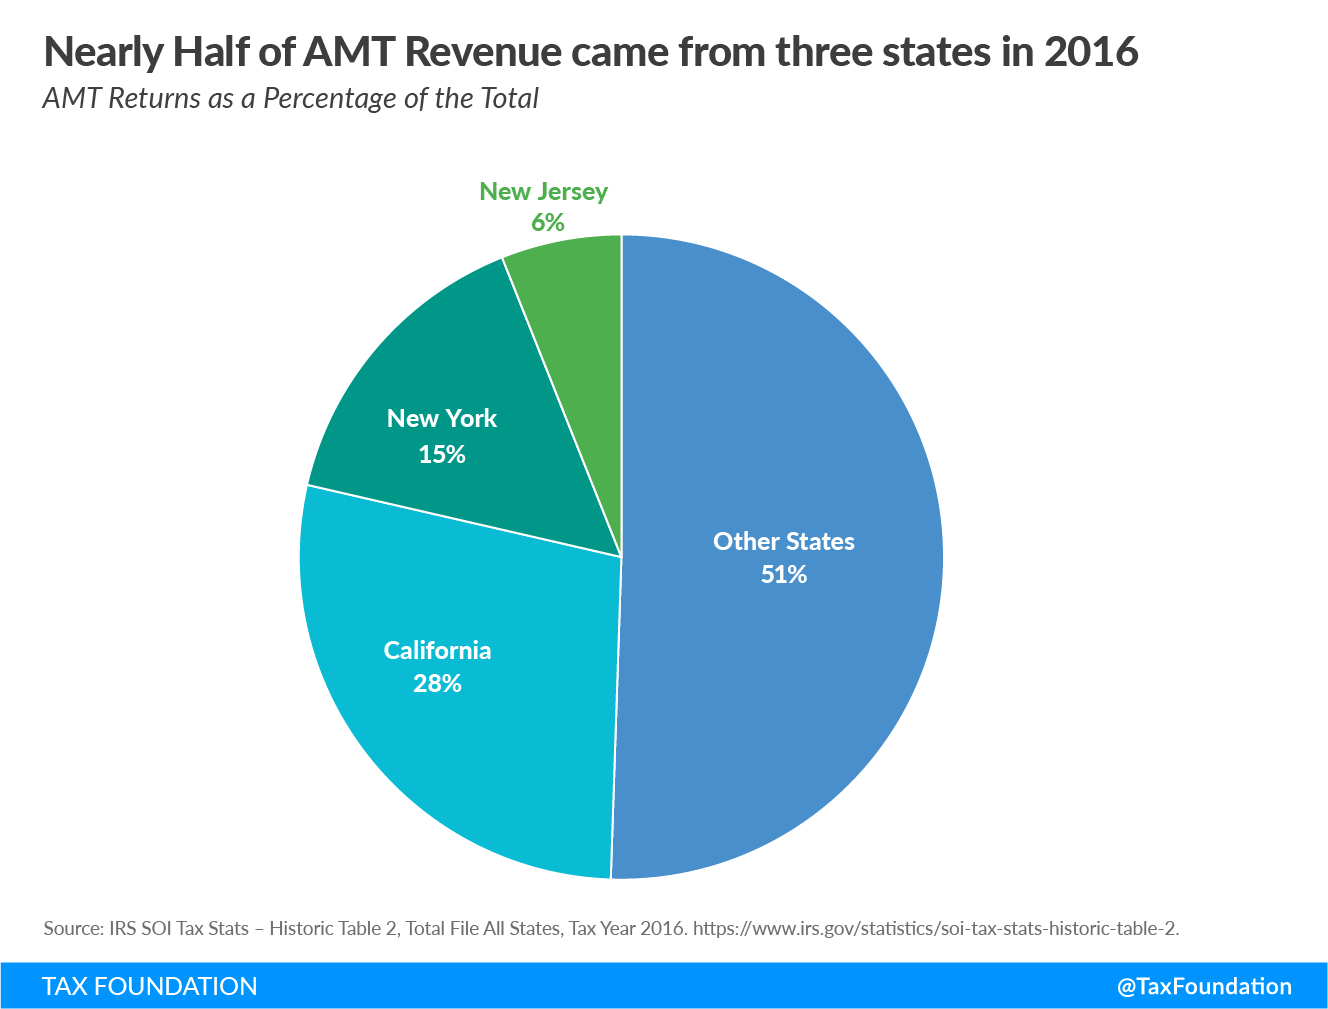 Nearly half of alternative minimum tax AMT revenue came from three states in 2016